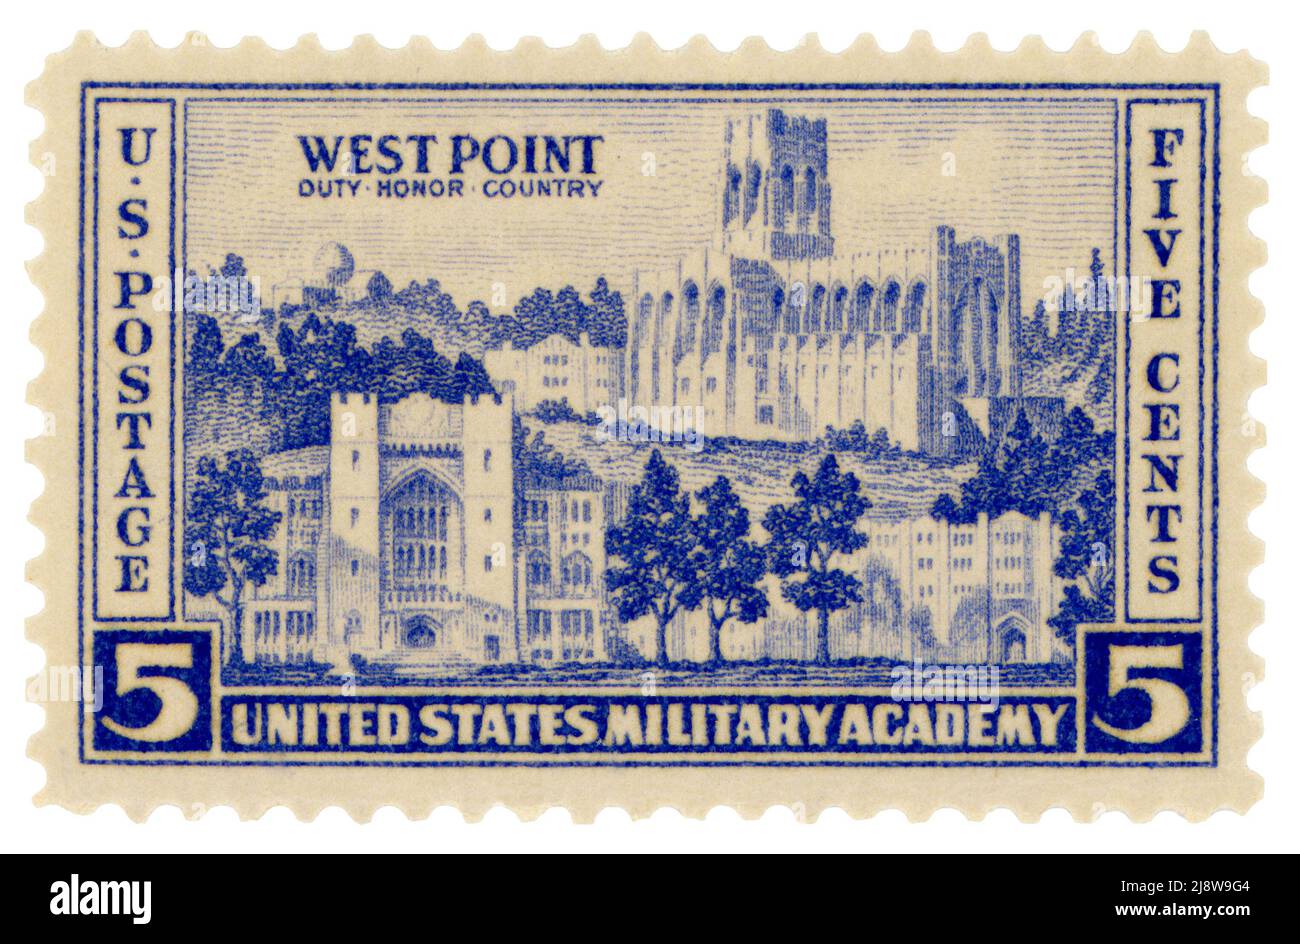 West Point, the Unites States Military Academy, postage stamp was issued in 1937. Stock Photo